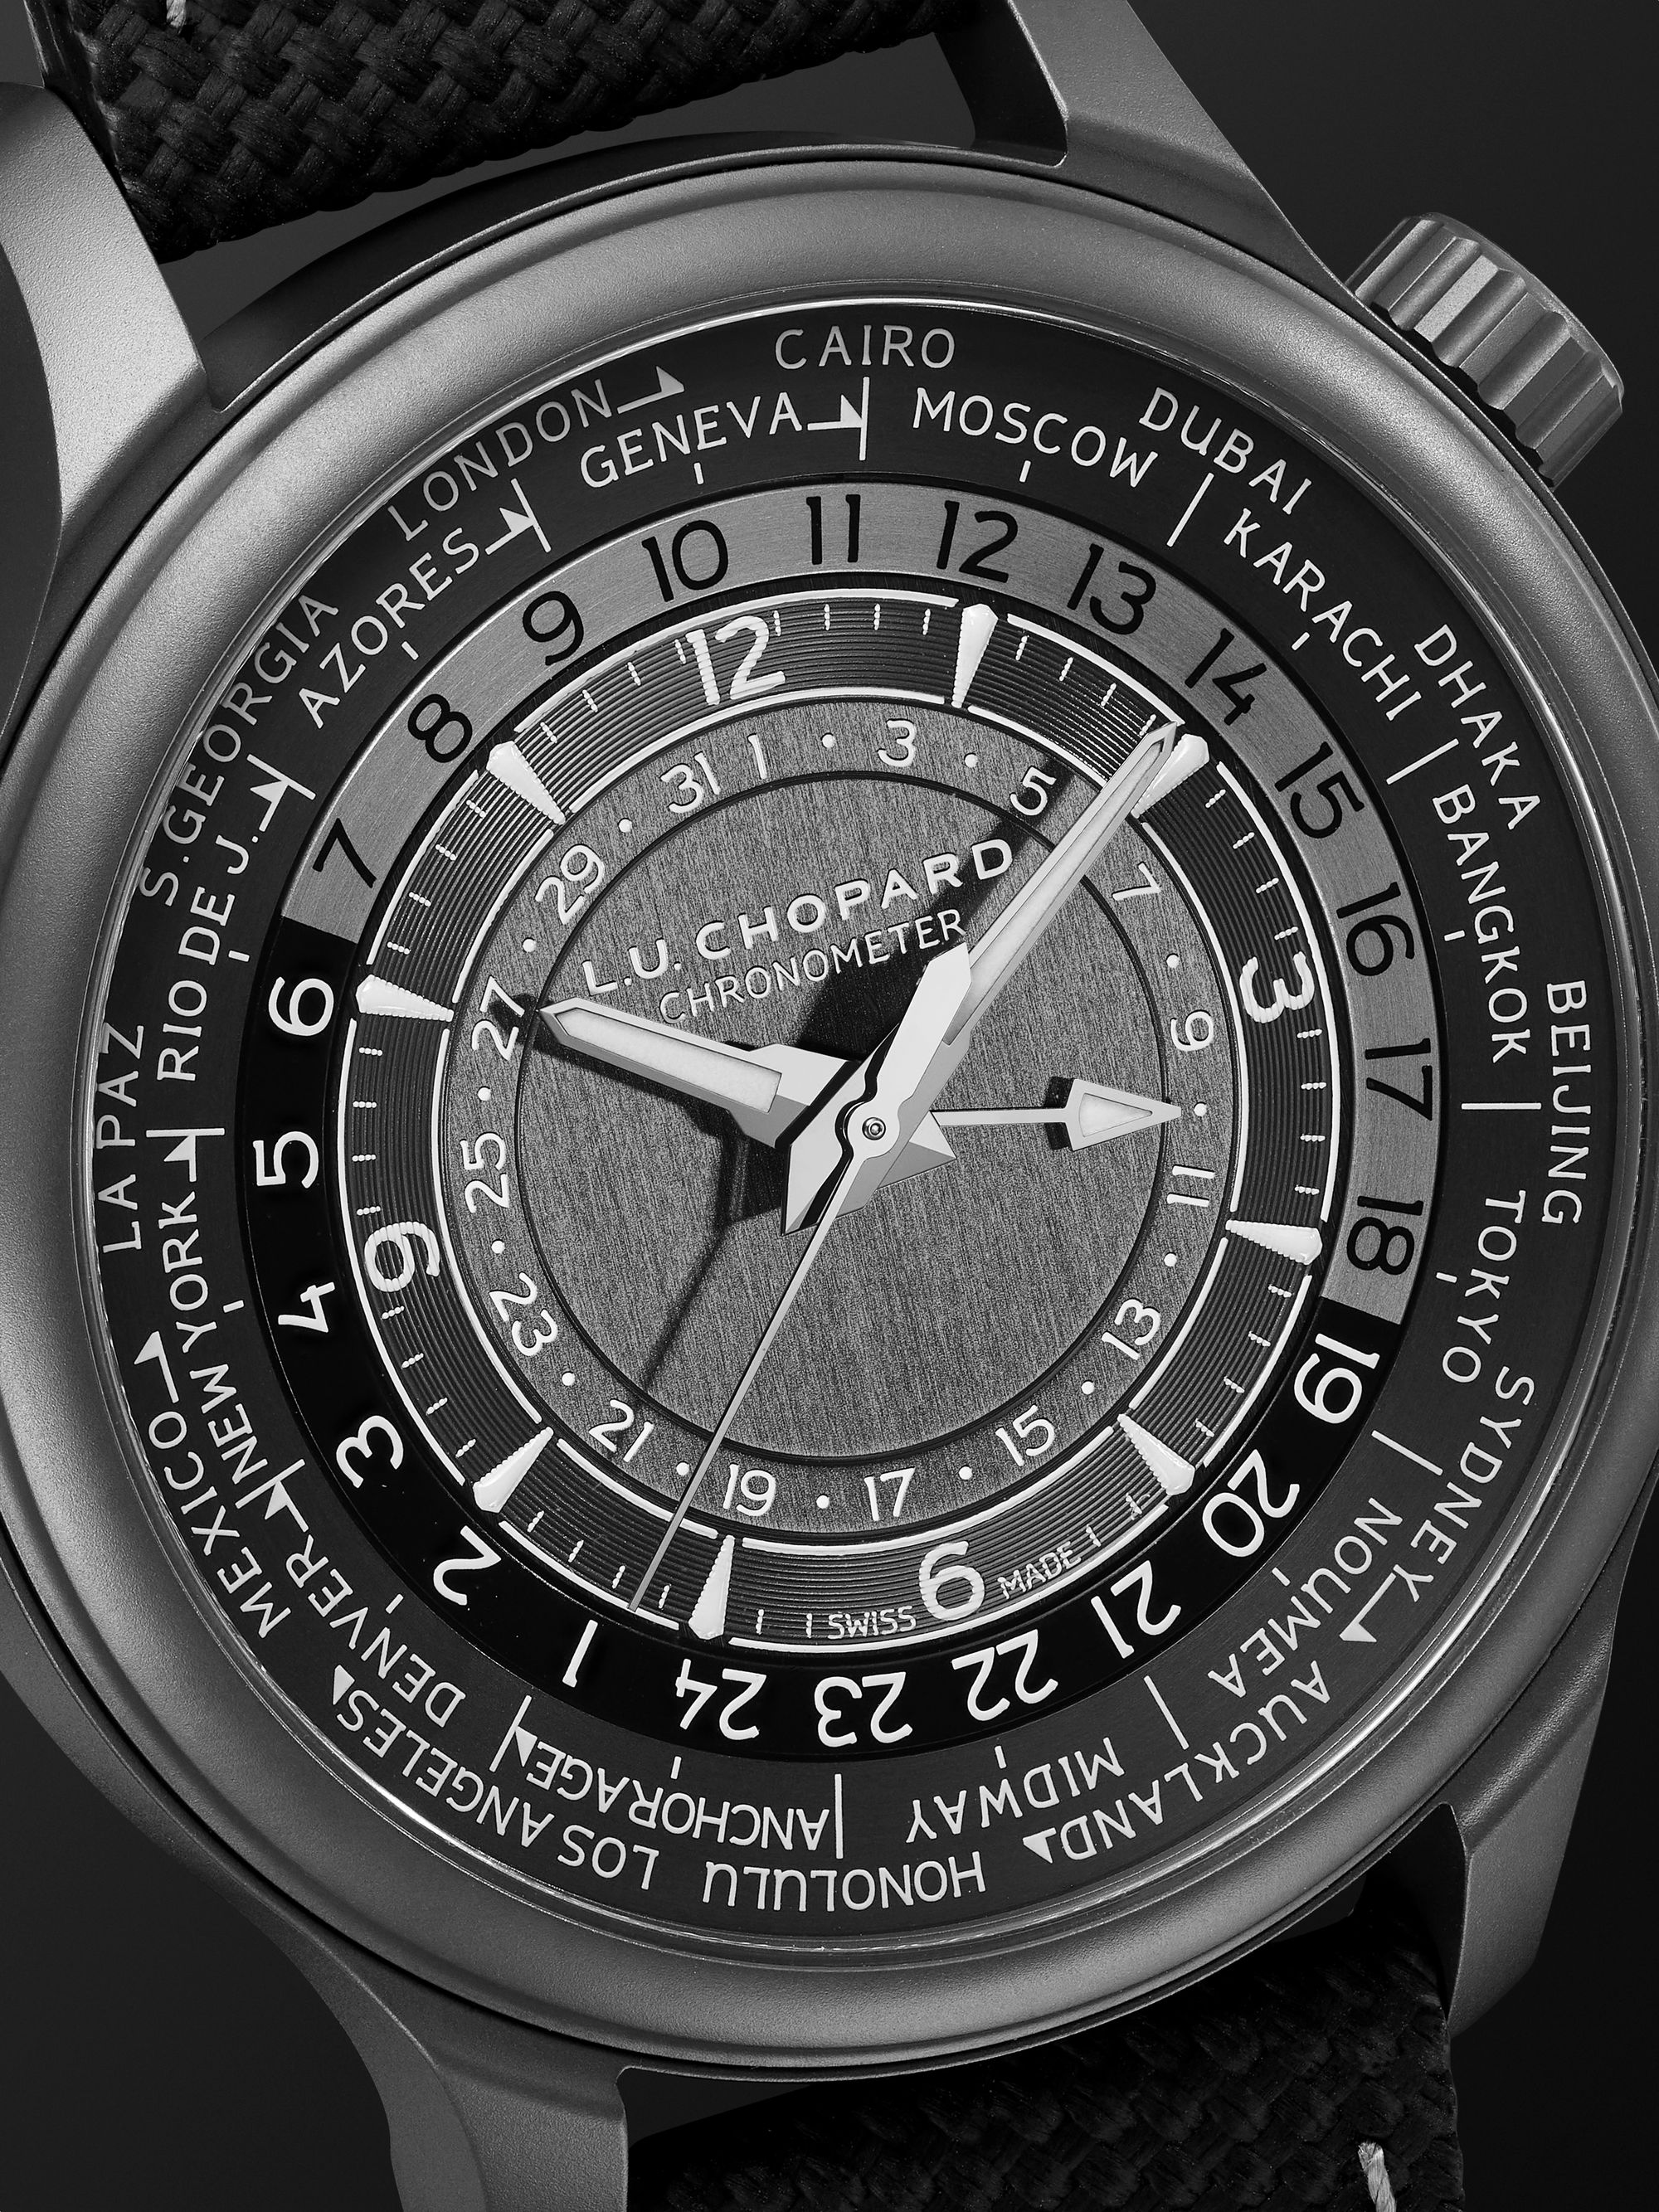 CHOPARD L.U.C. Time Traveler One Limited Edition Automatic World Time 42mm Stainless Steel and Rubber Watch, Ref. No. 168574-3008